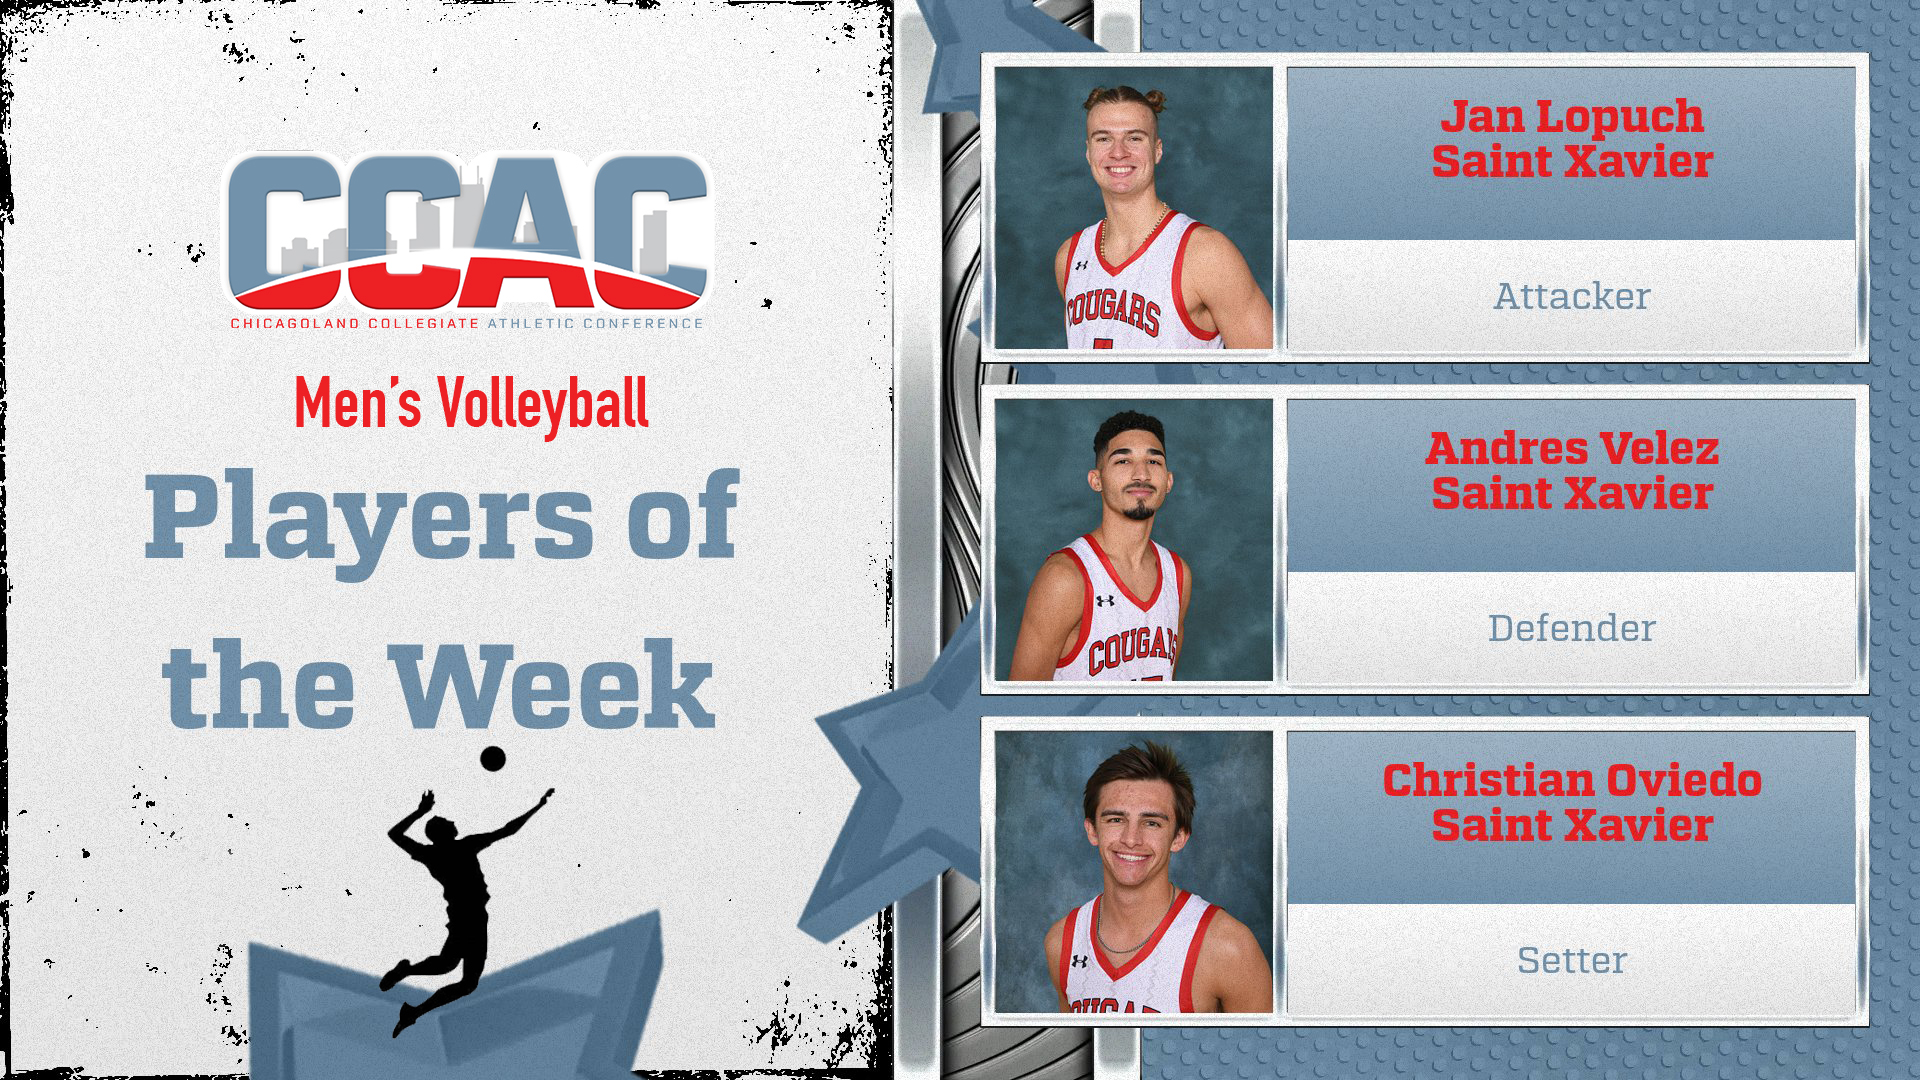 Saint Xavier Sweeps Men's Volleyball Weekly Honors For Second Time This Season